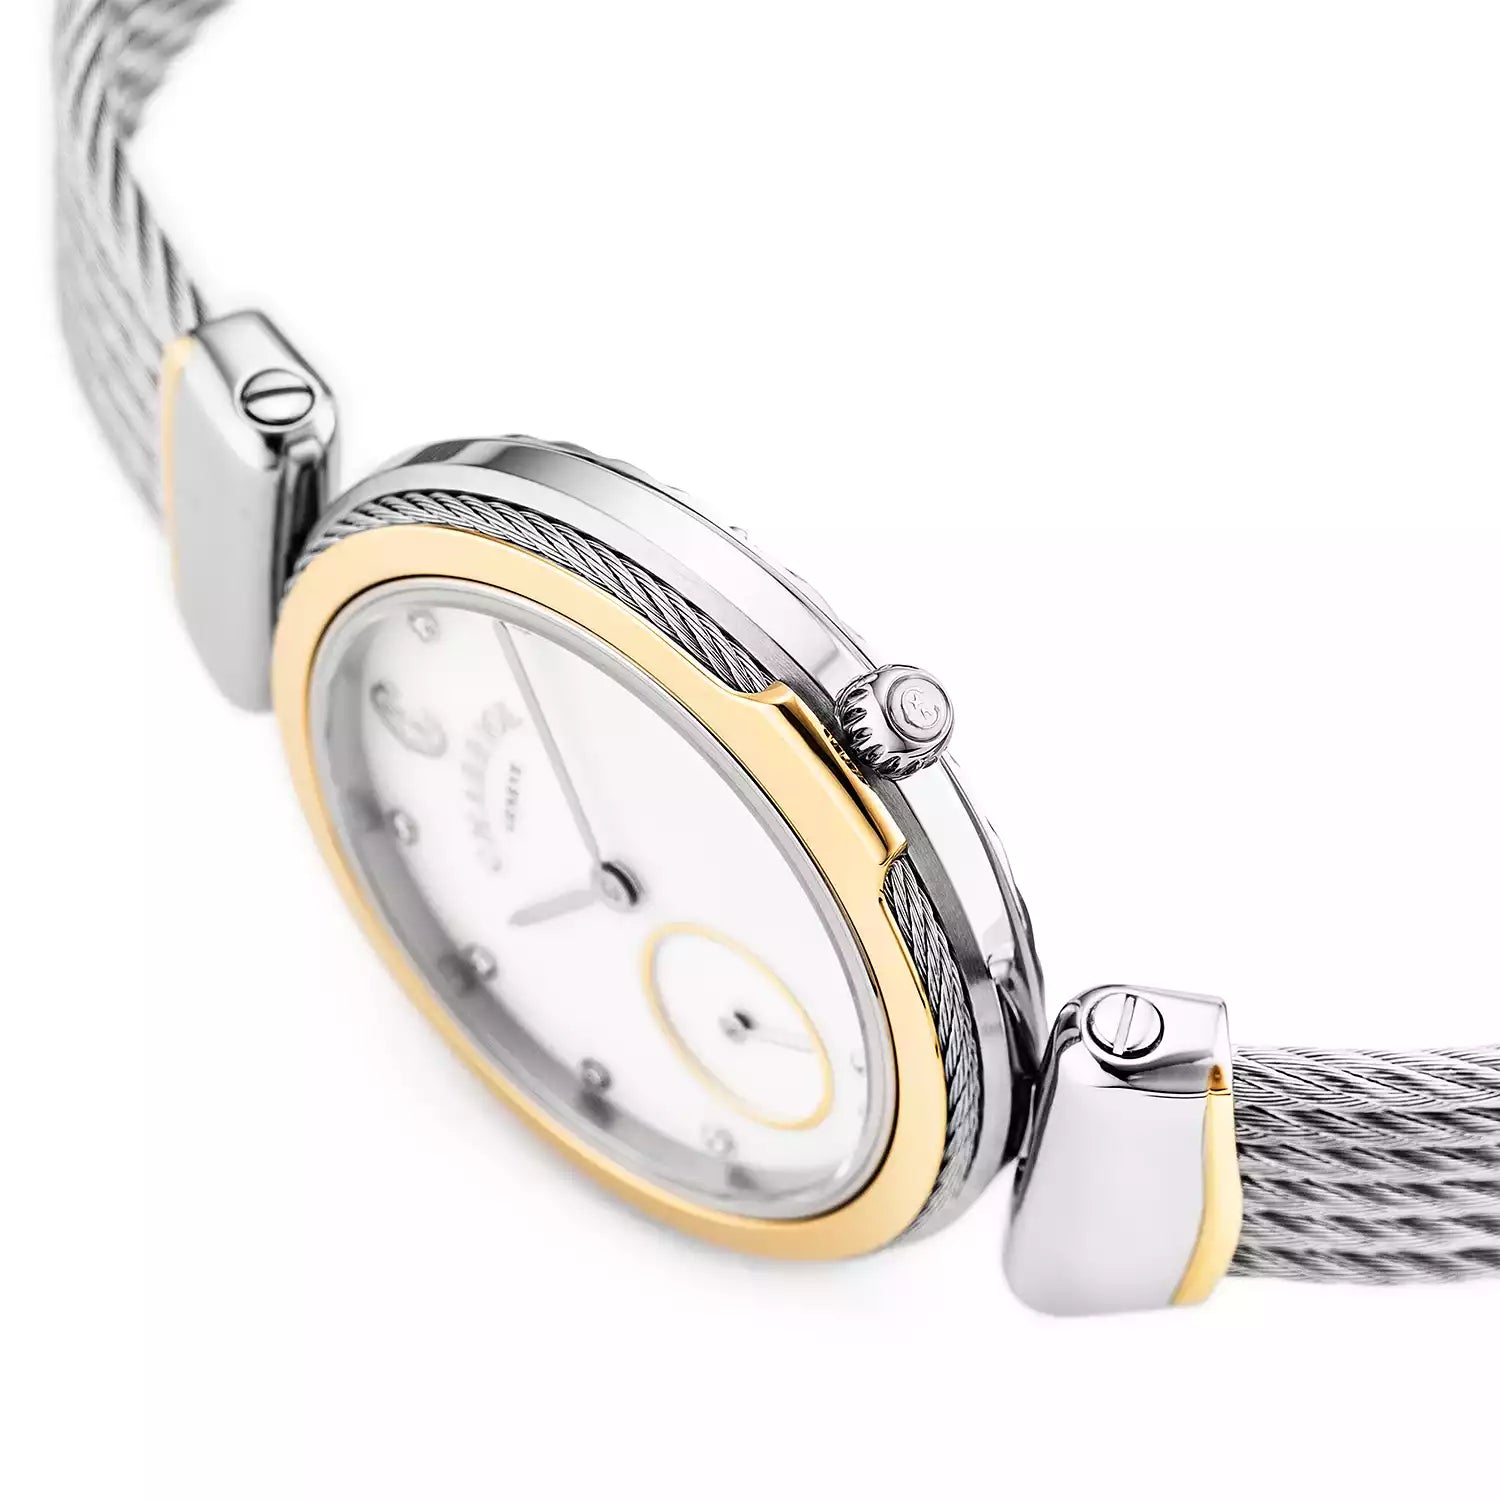 Celtic Legacy 30mm Light Grey Cable, Yellow Gold Bezel and White MOP Dial - Charriol Geneve -  Watch